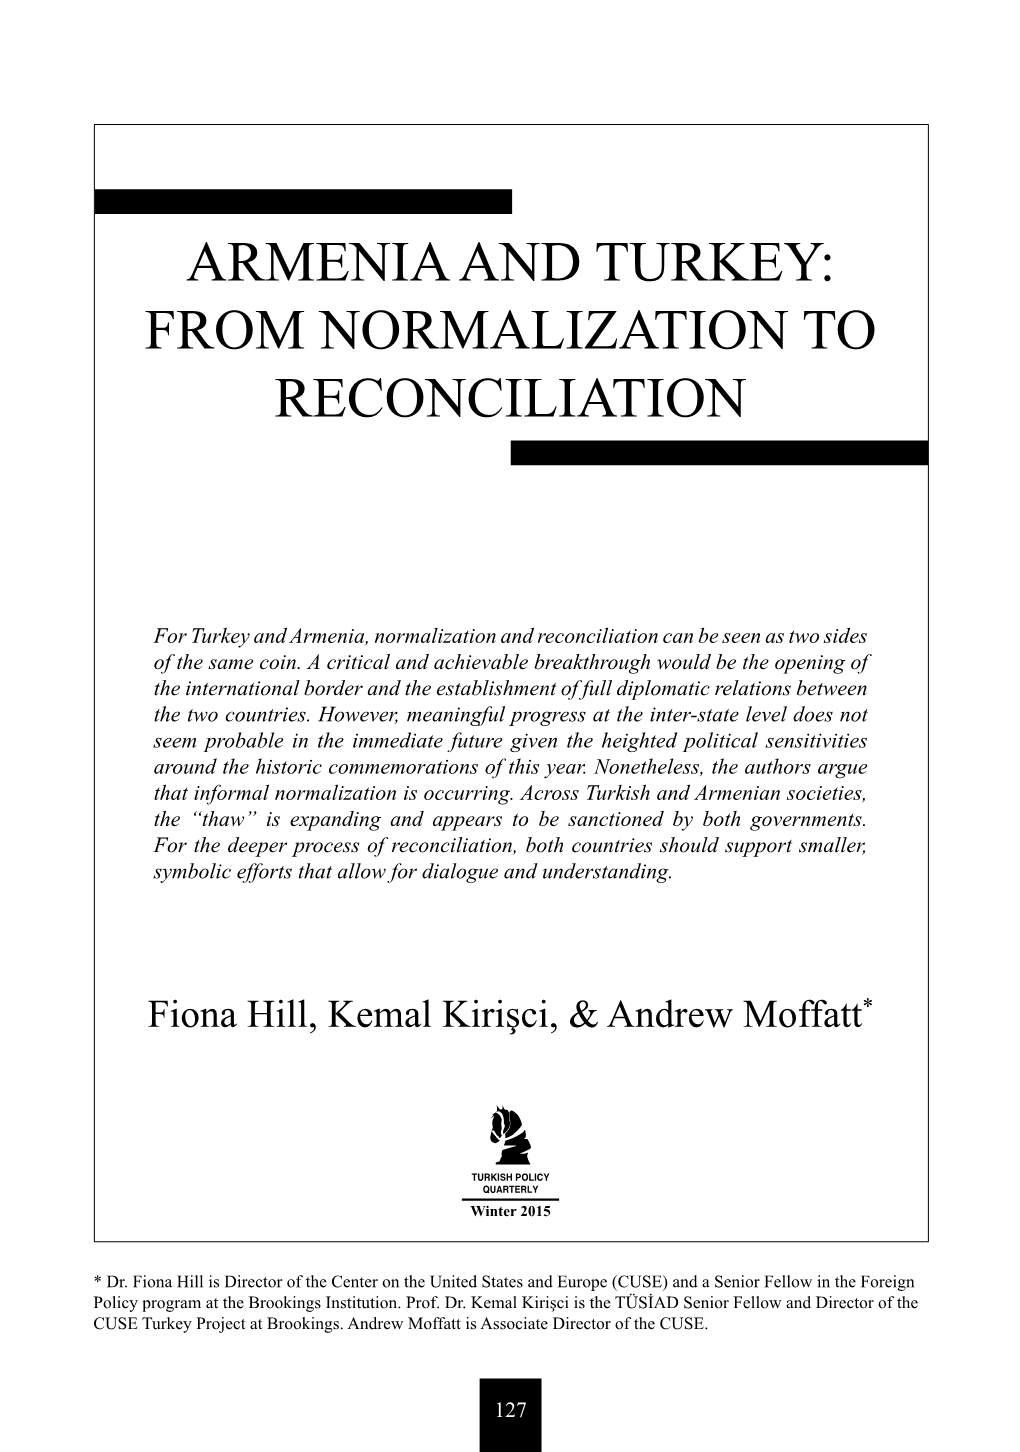 Armenia and Turkey: from Normalization to Reconciliation